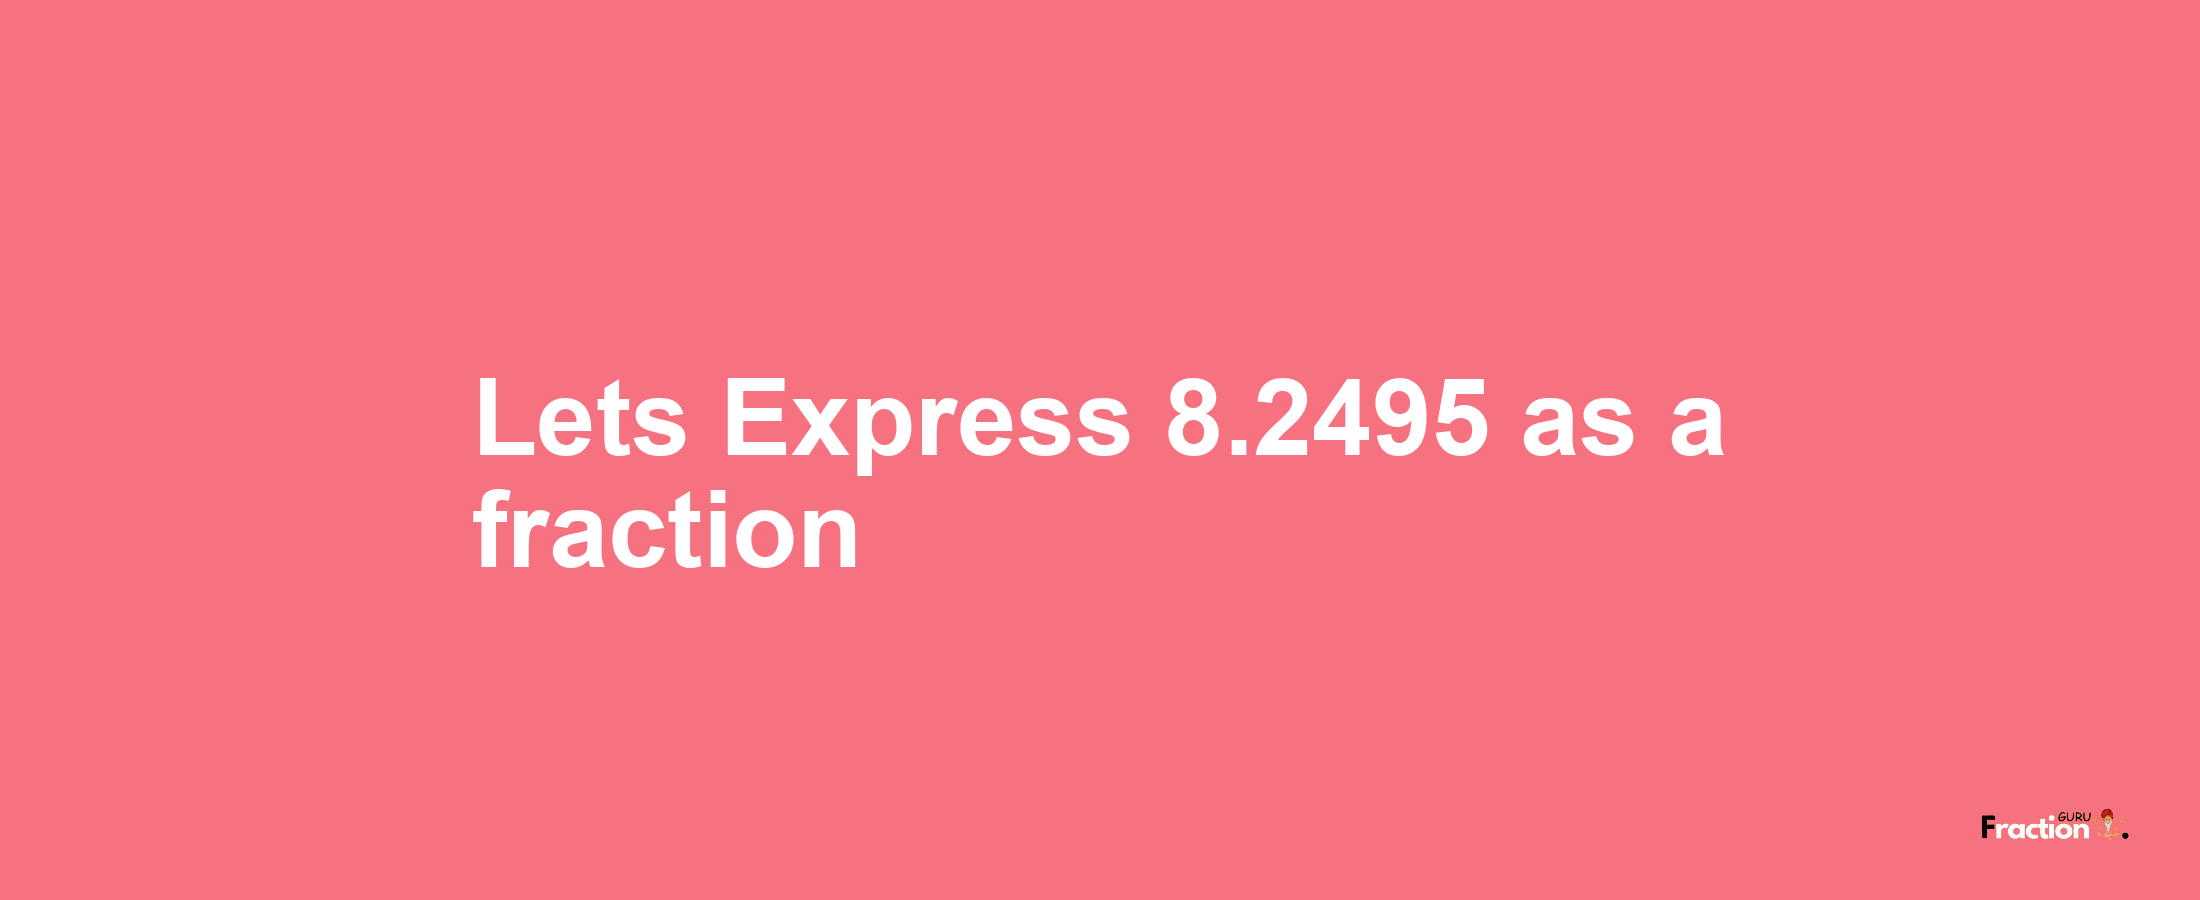 Lets Express 8.2495 as afraction